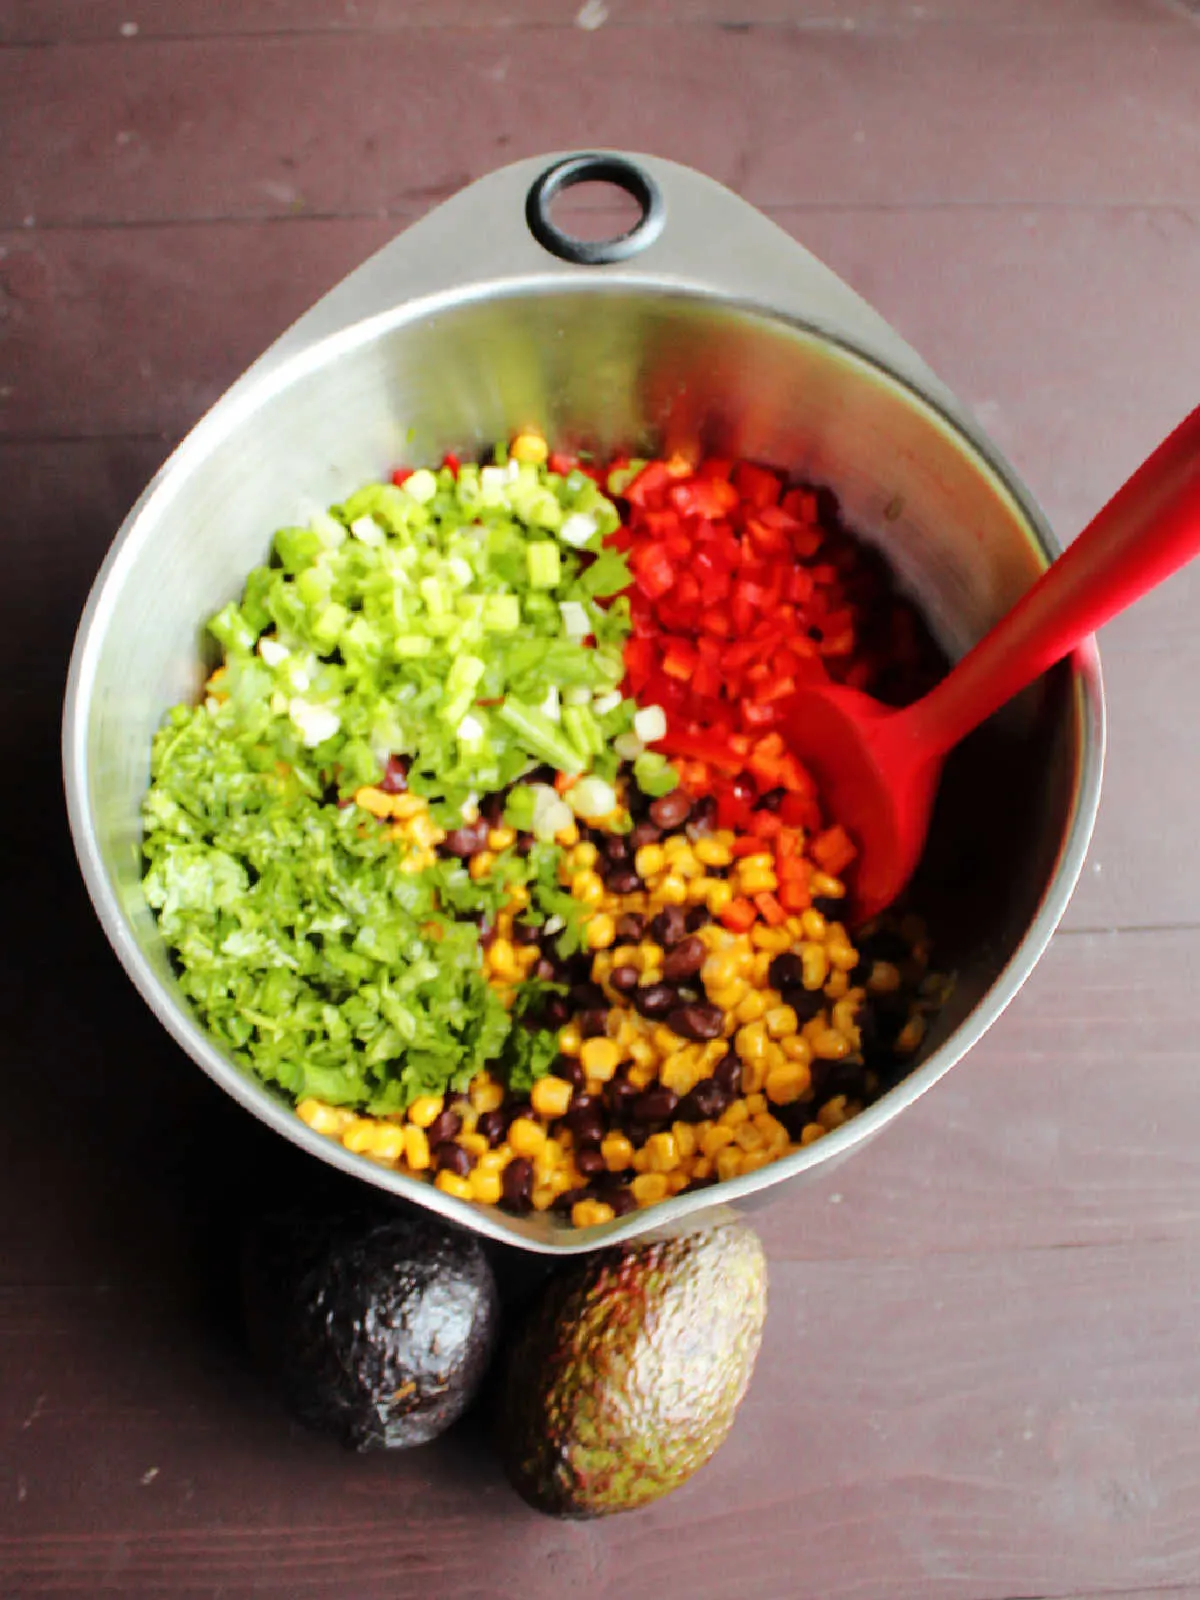 stirring red pepper, cilantro and green onions into black bean and corn mixture.